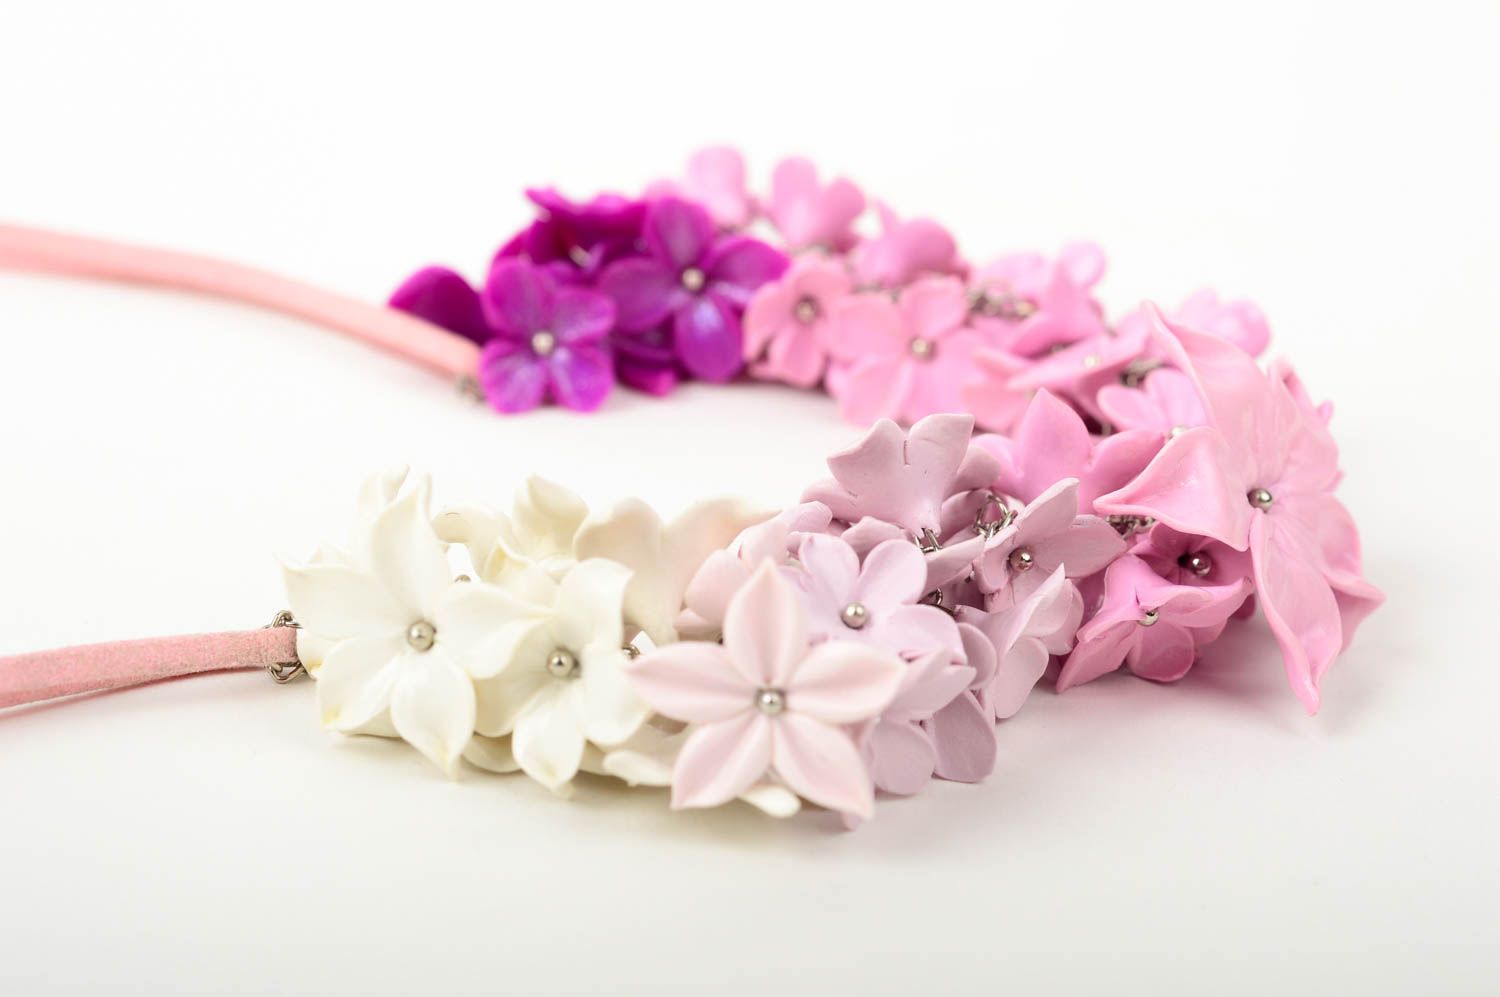 Handmade necklace flower jewelry polymer clay designer accessories cool gifts photo 3